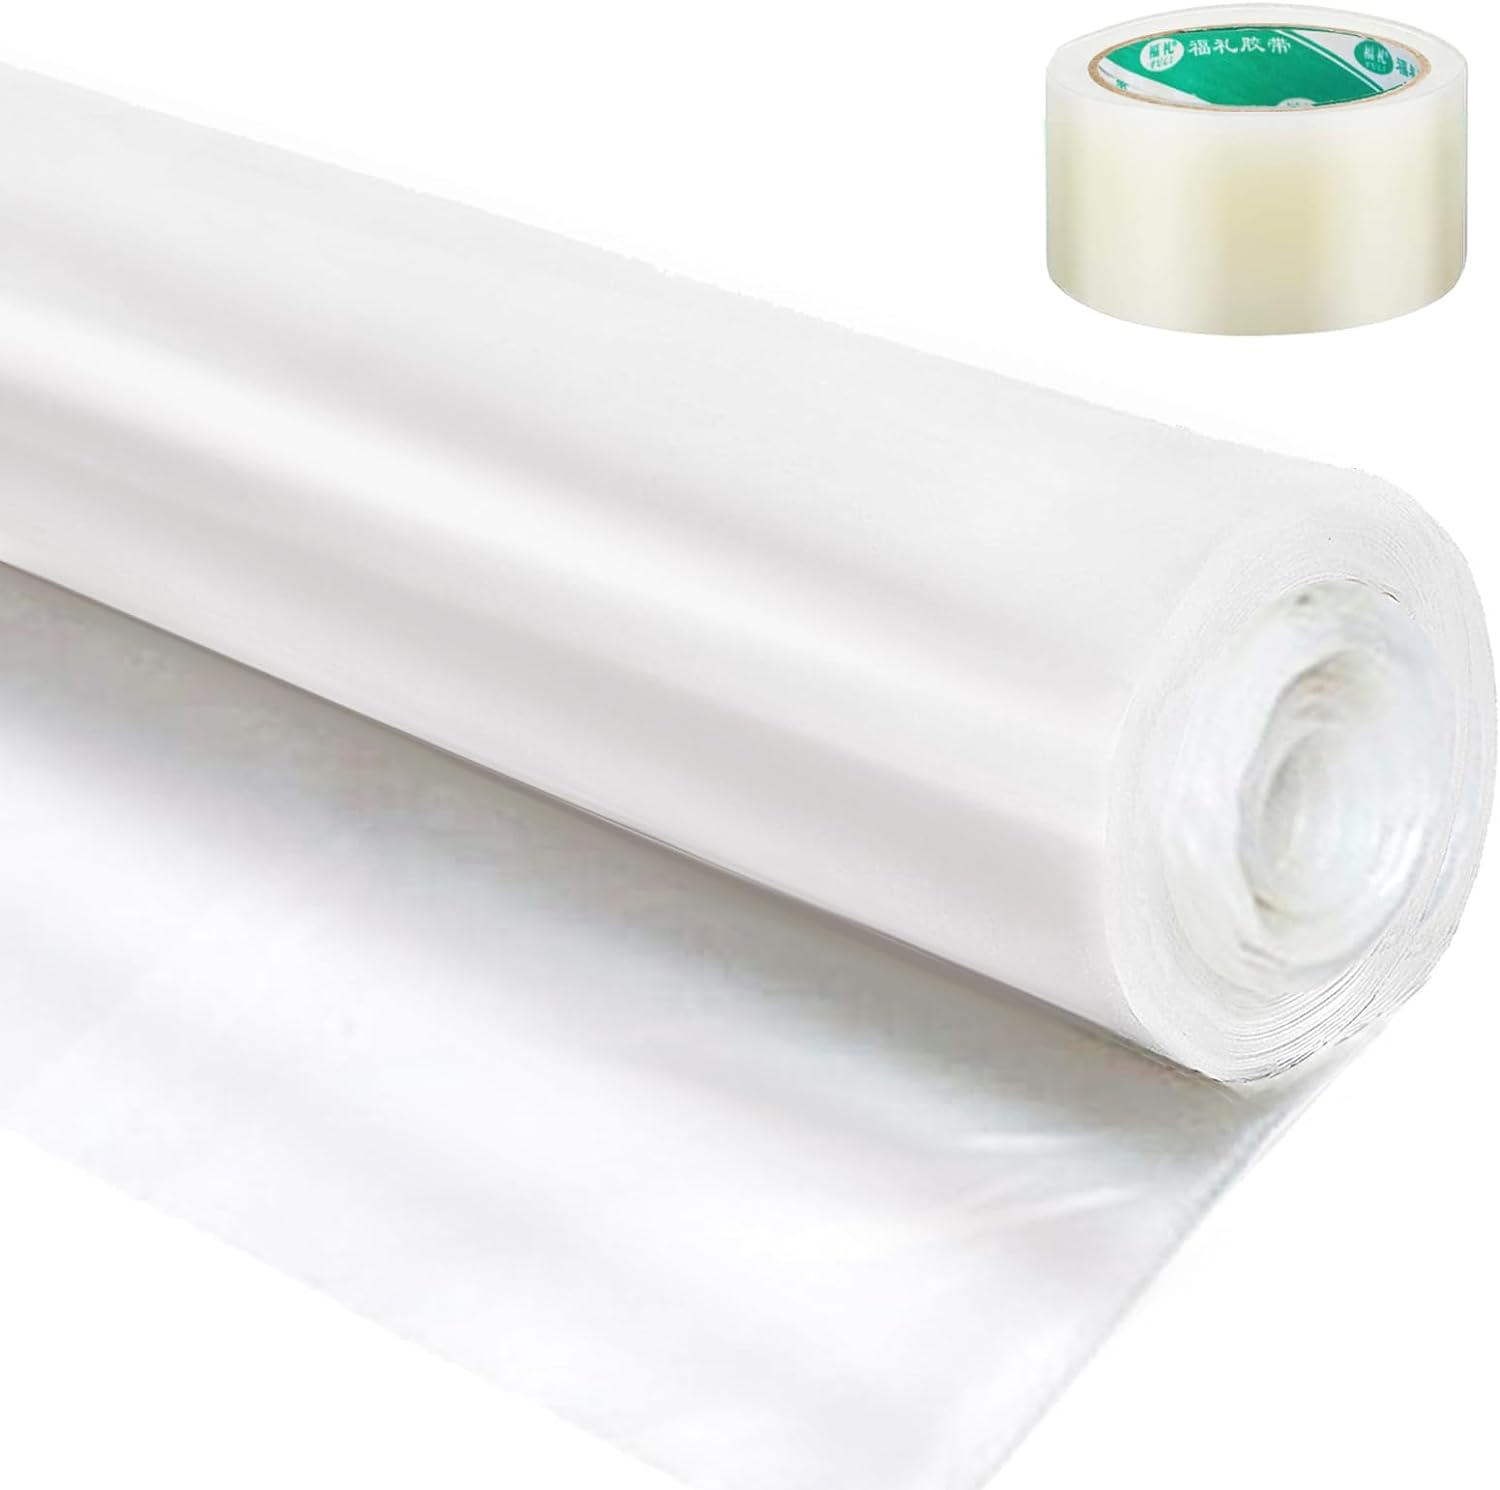 Kiouposy 12 x 25 ft Greenhouse Film  Repair Tape, 6 mil Clear Greenhouse Cover, UV Resistant Covering Plastic Sheeting Hoop Anti-drip House Plastic Polyethylene Cover